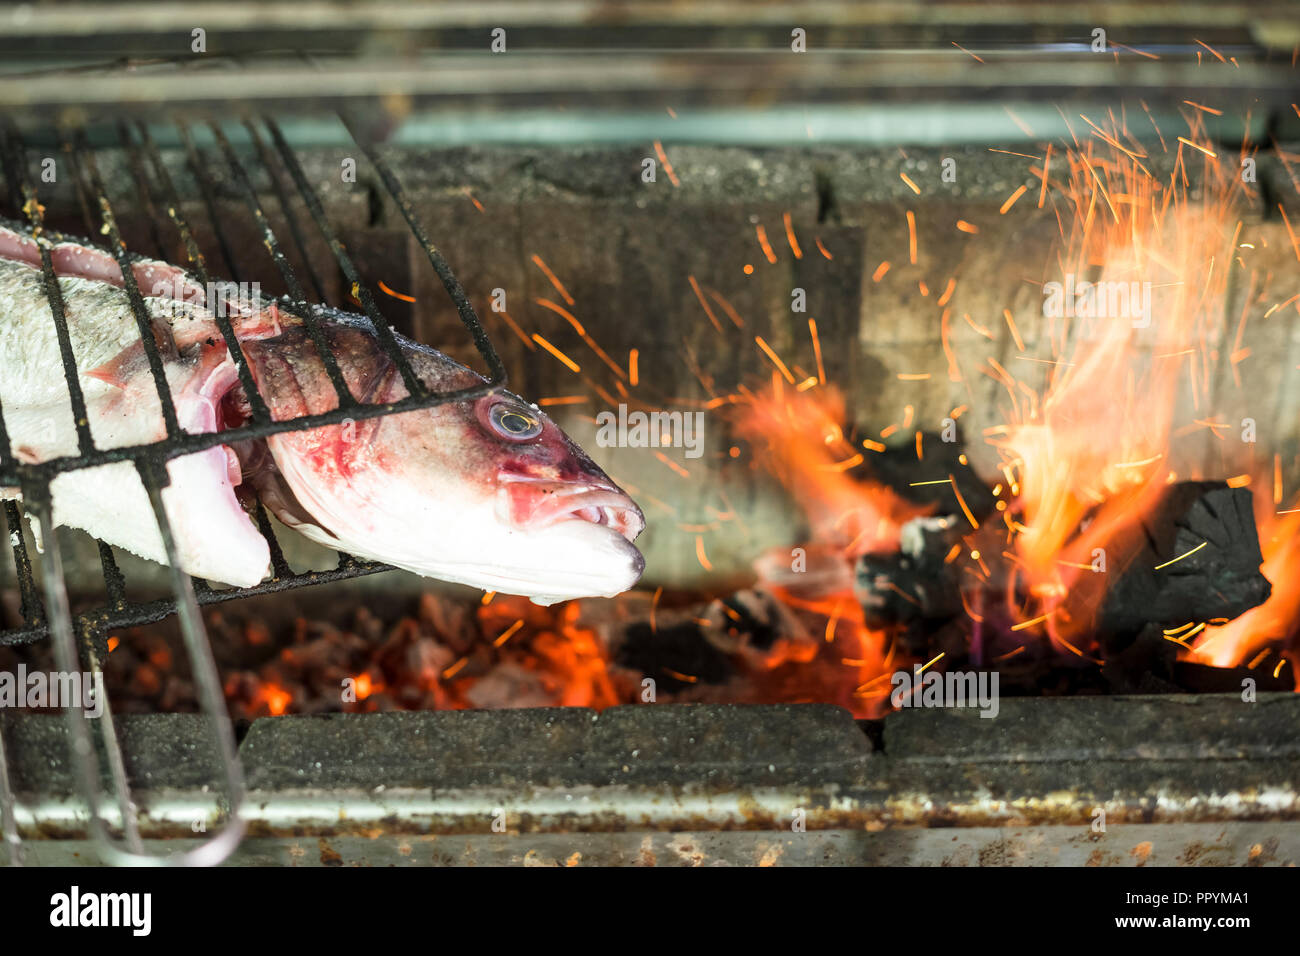 Big golden fish grilled on charcoal on the barbeque in the restaurant Stock Photo